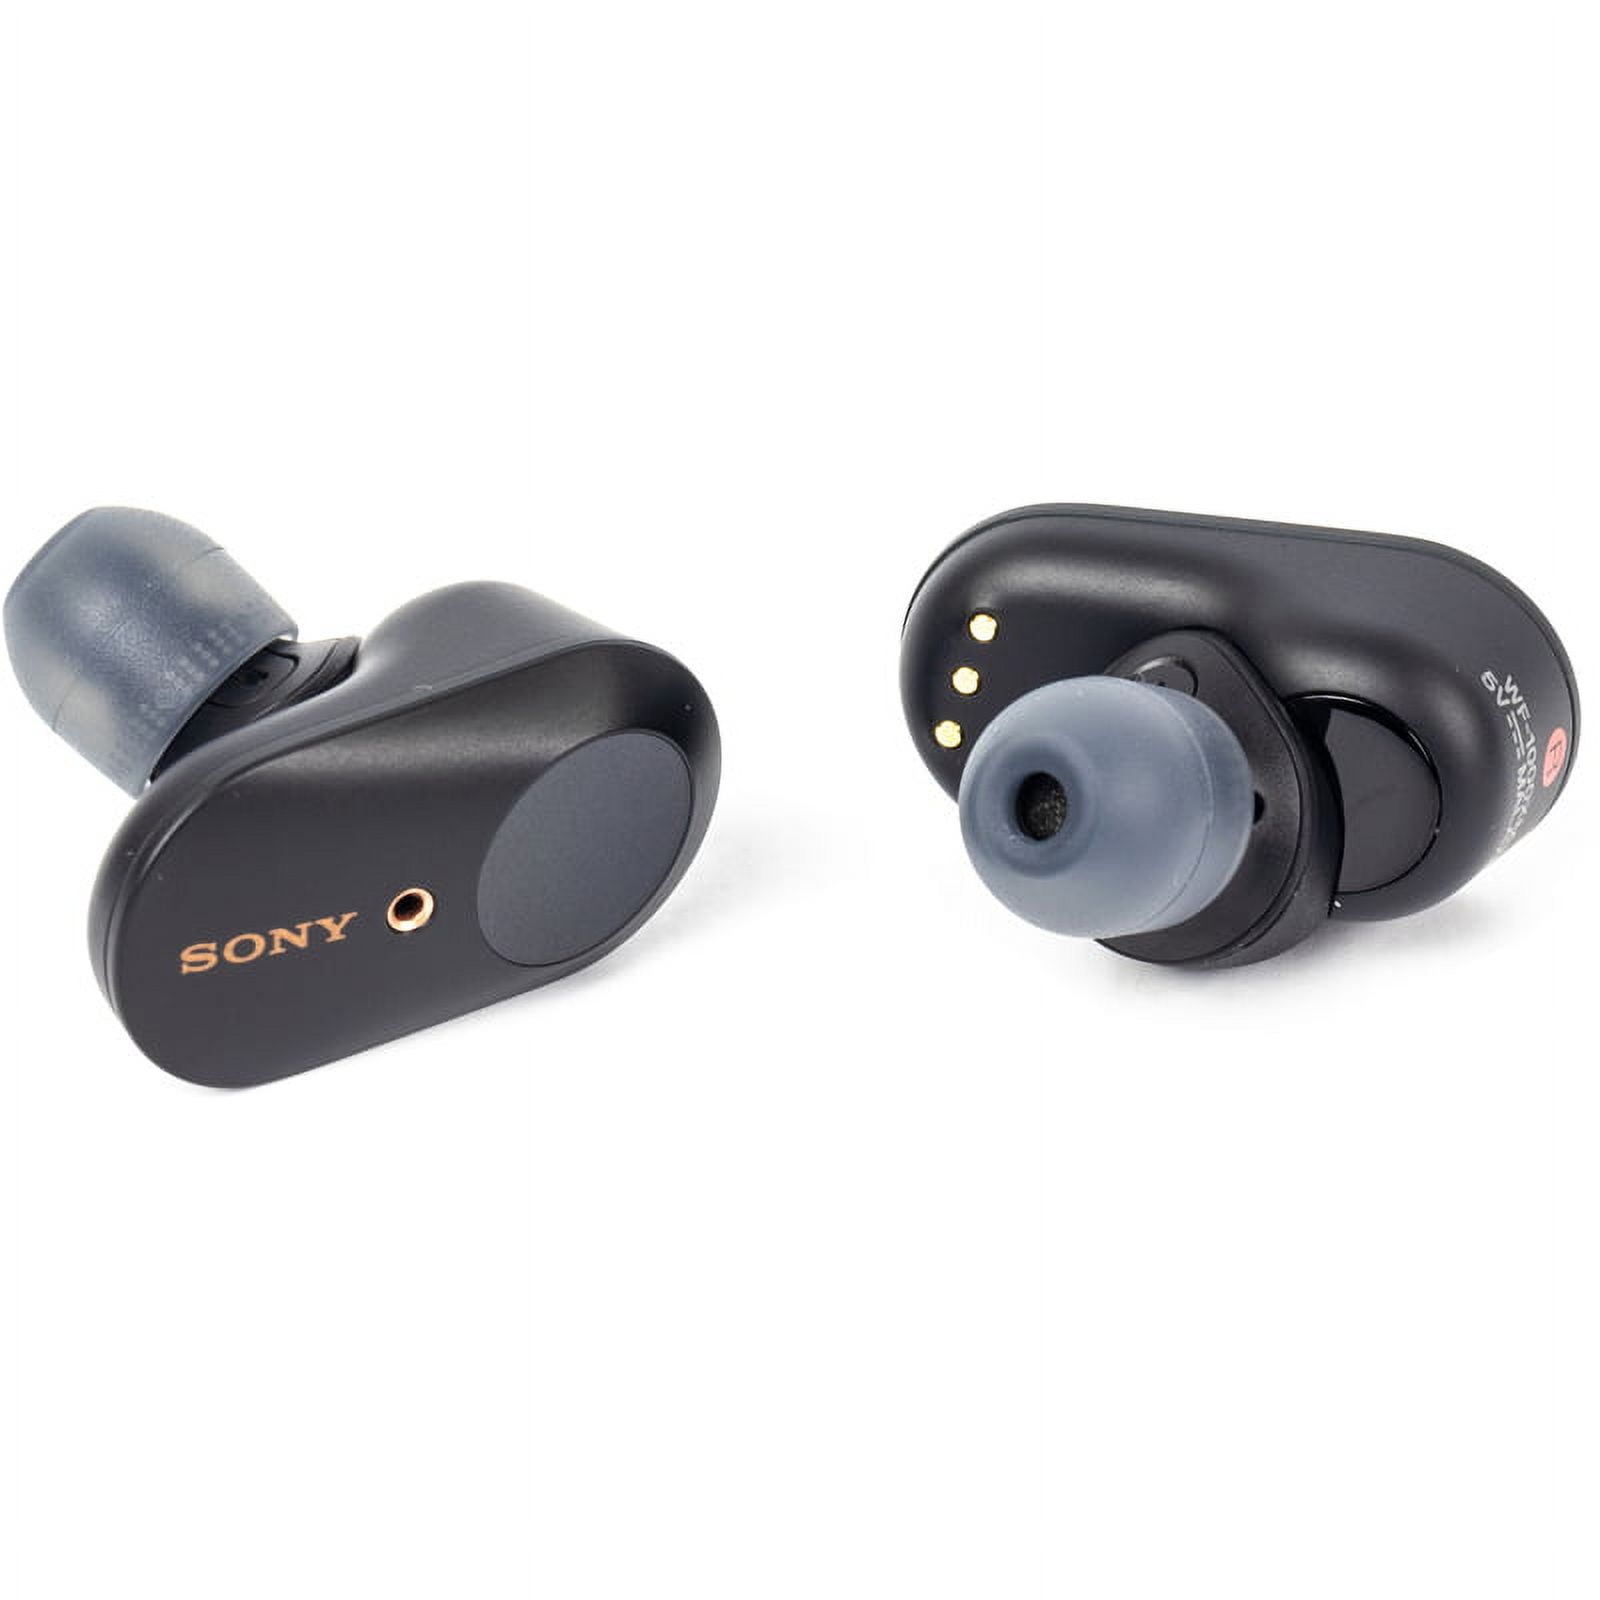  Sony WF-1000XM3 Industry Leading Noise Canceling Truly Wireless  Earbuds Headset/Headphones with AlexaVoice Control And Mic For Phone Call,  Black : Electronics